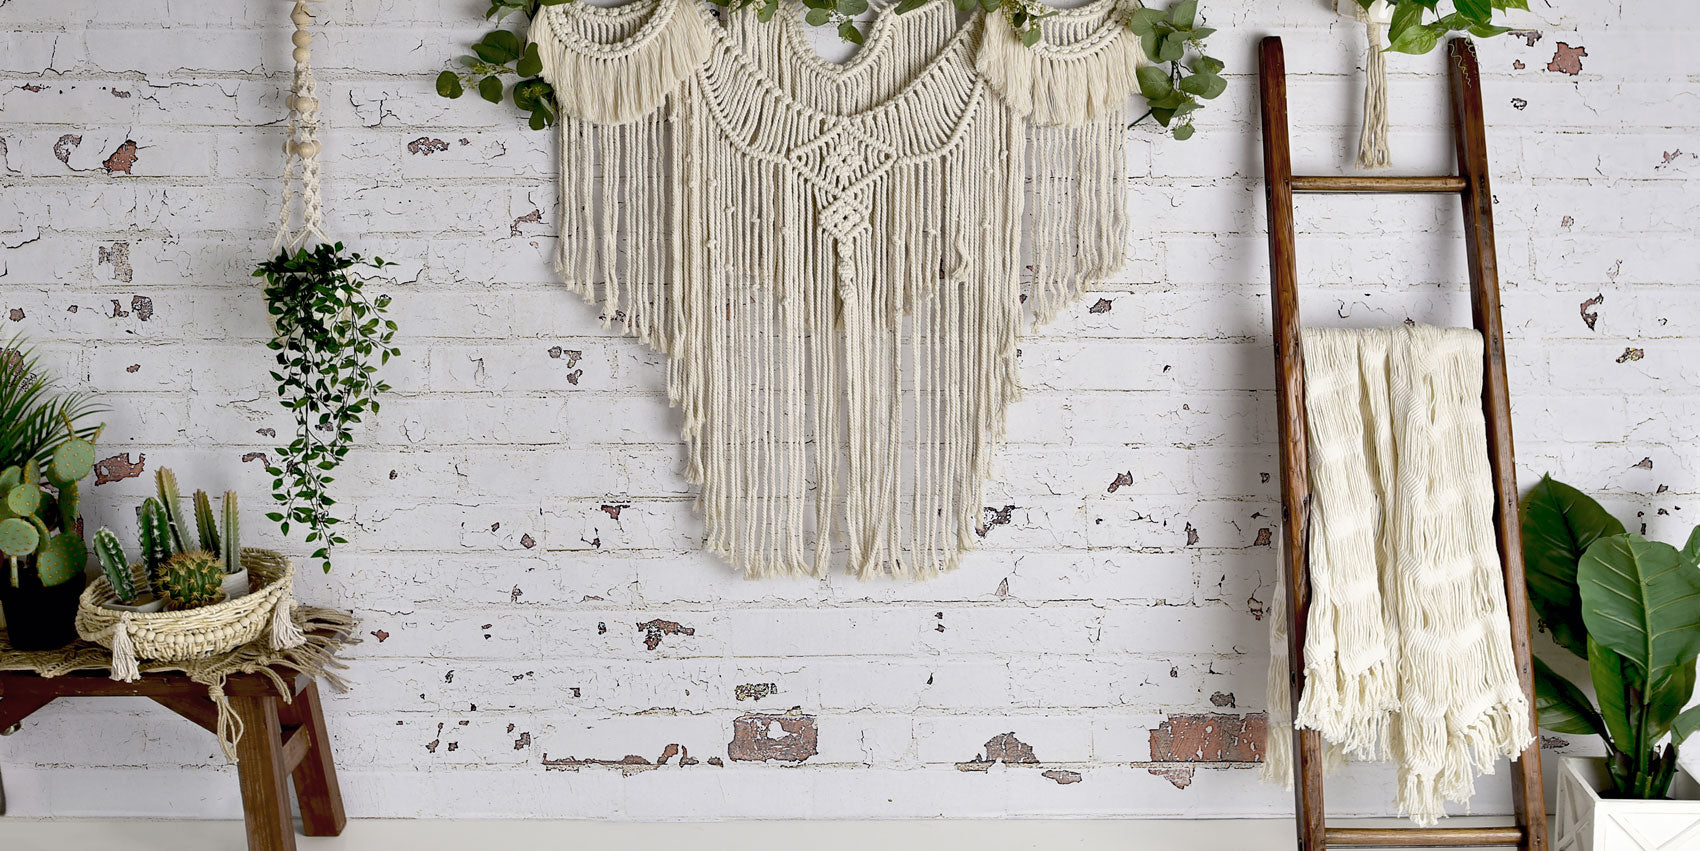 Kate Boho Macrame Bedroom Wall Mother's Day Backdrop Designed By Mandy Ringe Photography